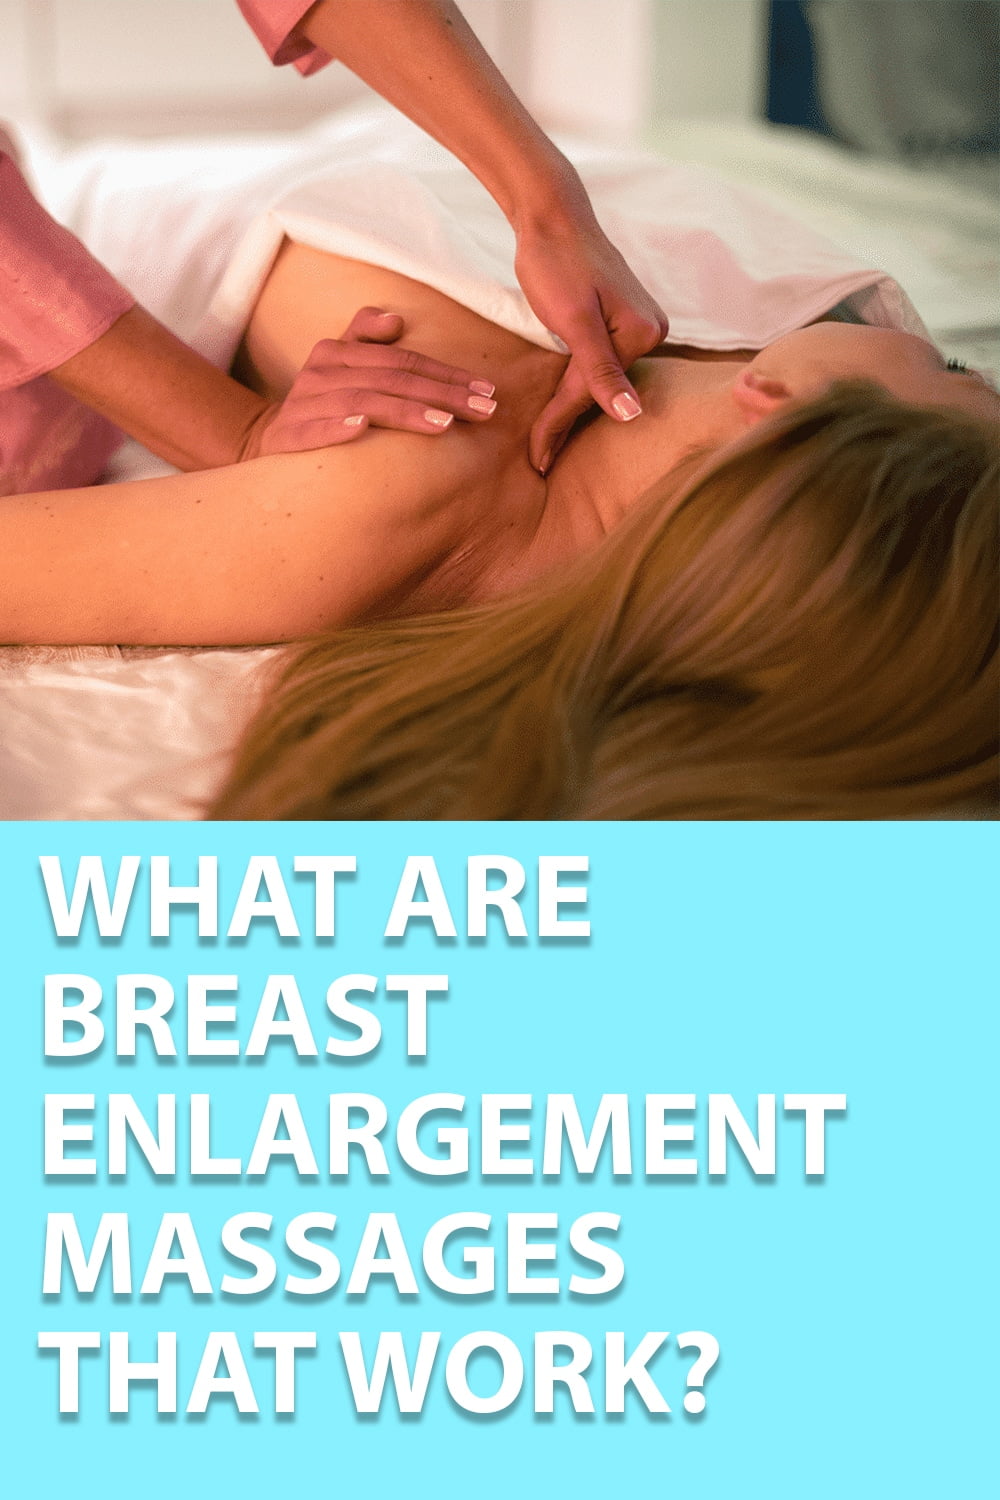 Do Breast Growth Massages Work?